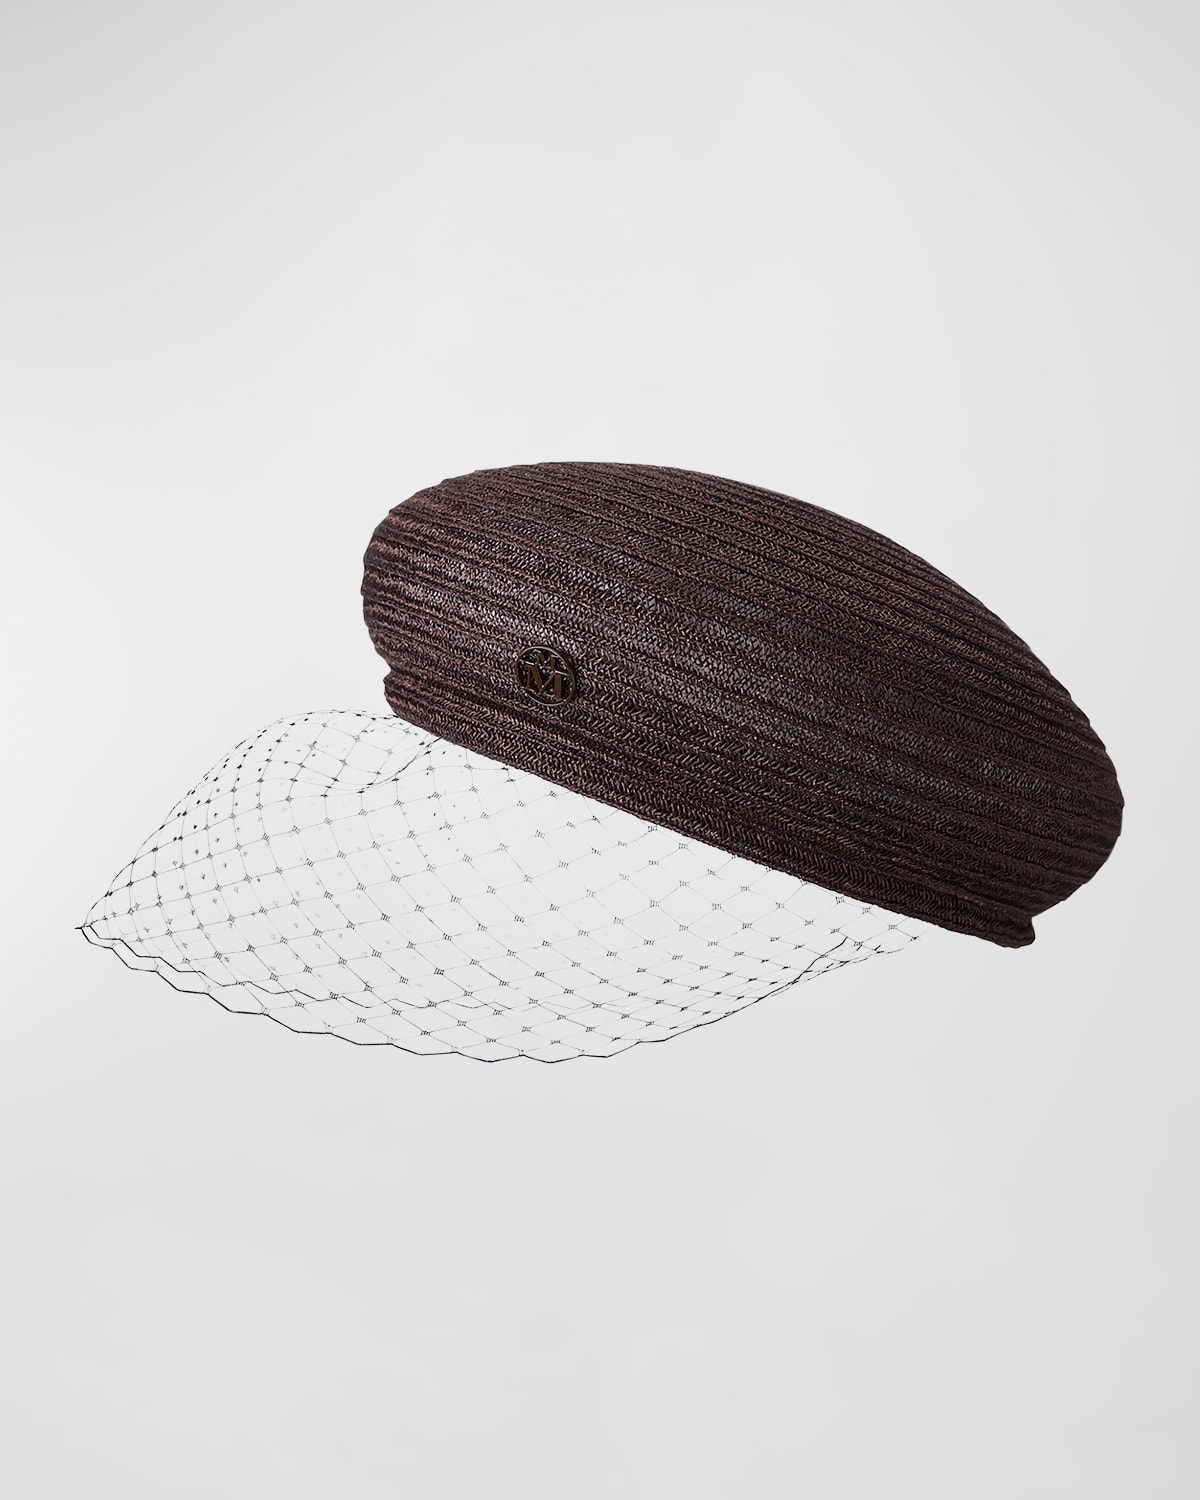 Maison Michel New Bonnie Straw Beret With Veil In Bitter Chocolate